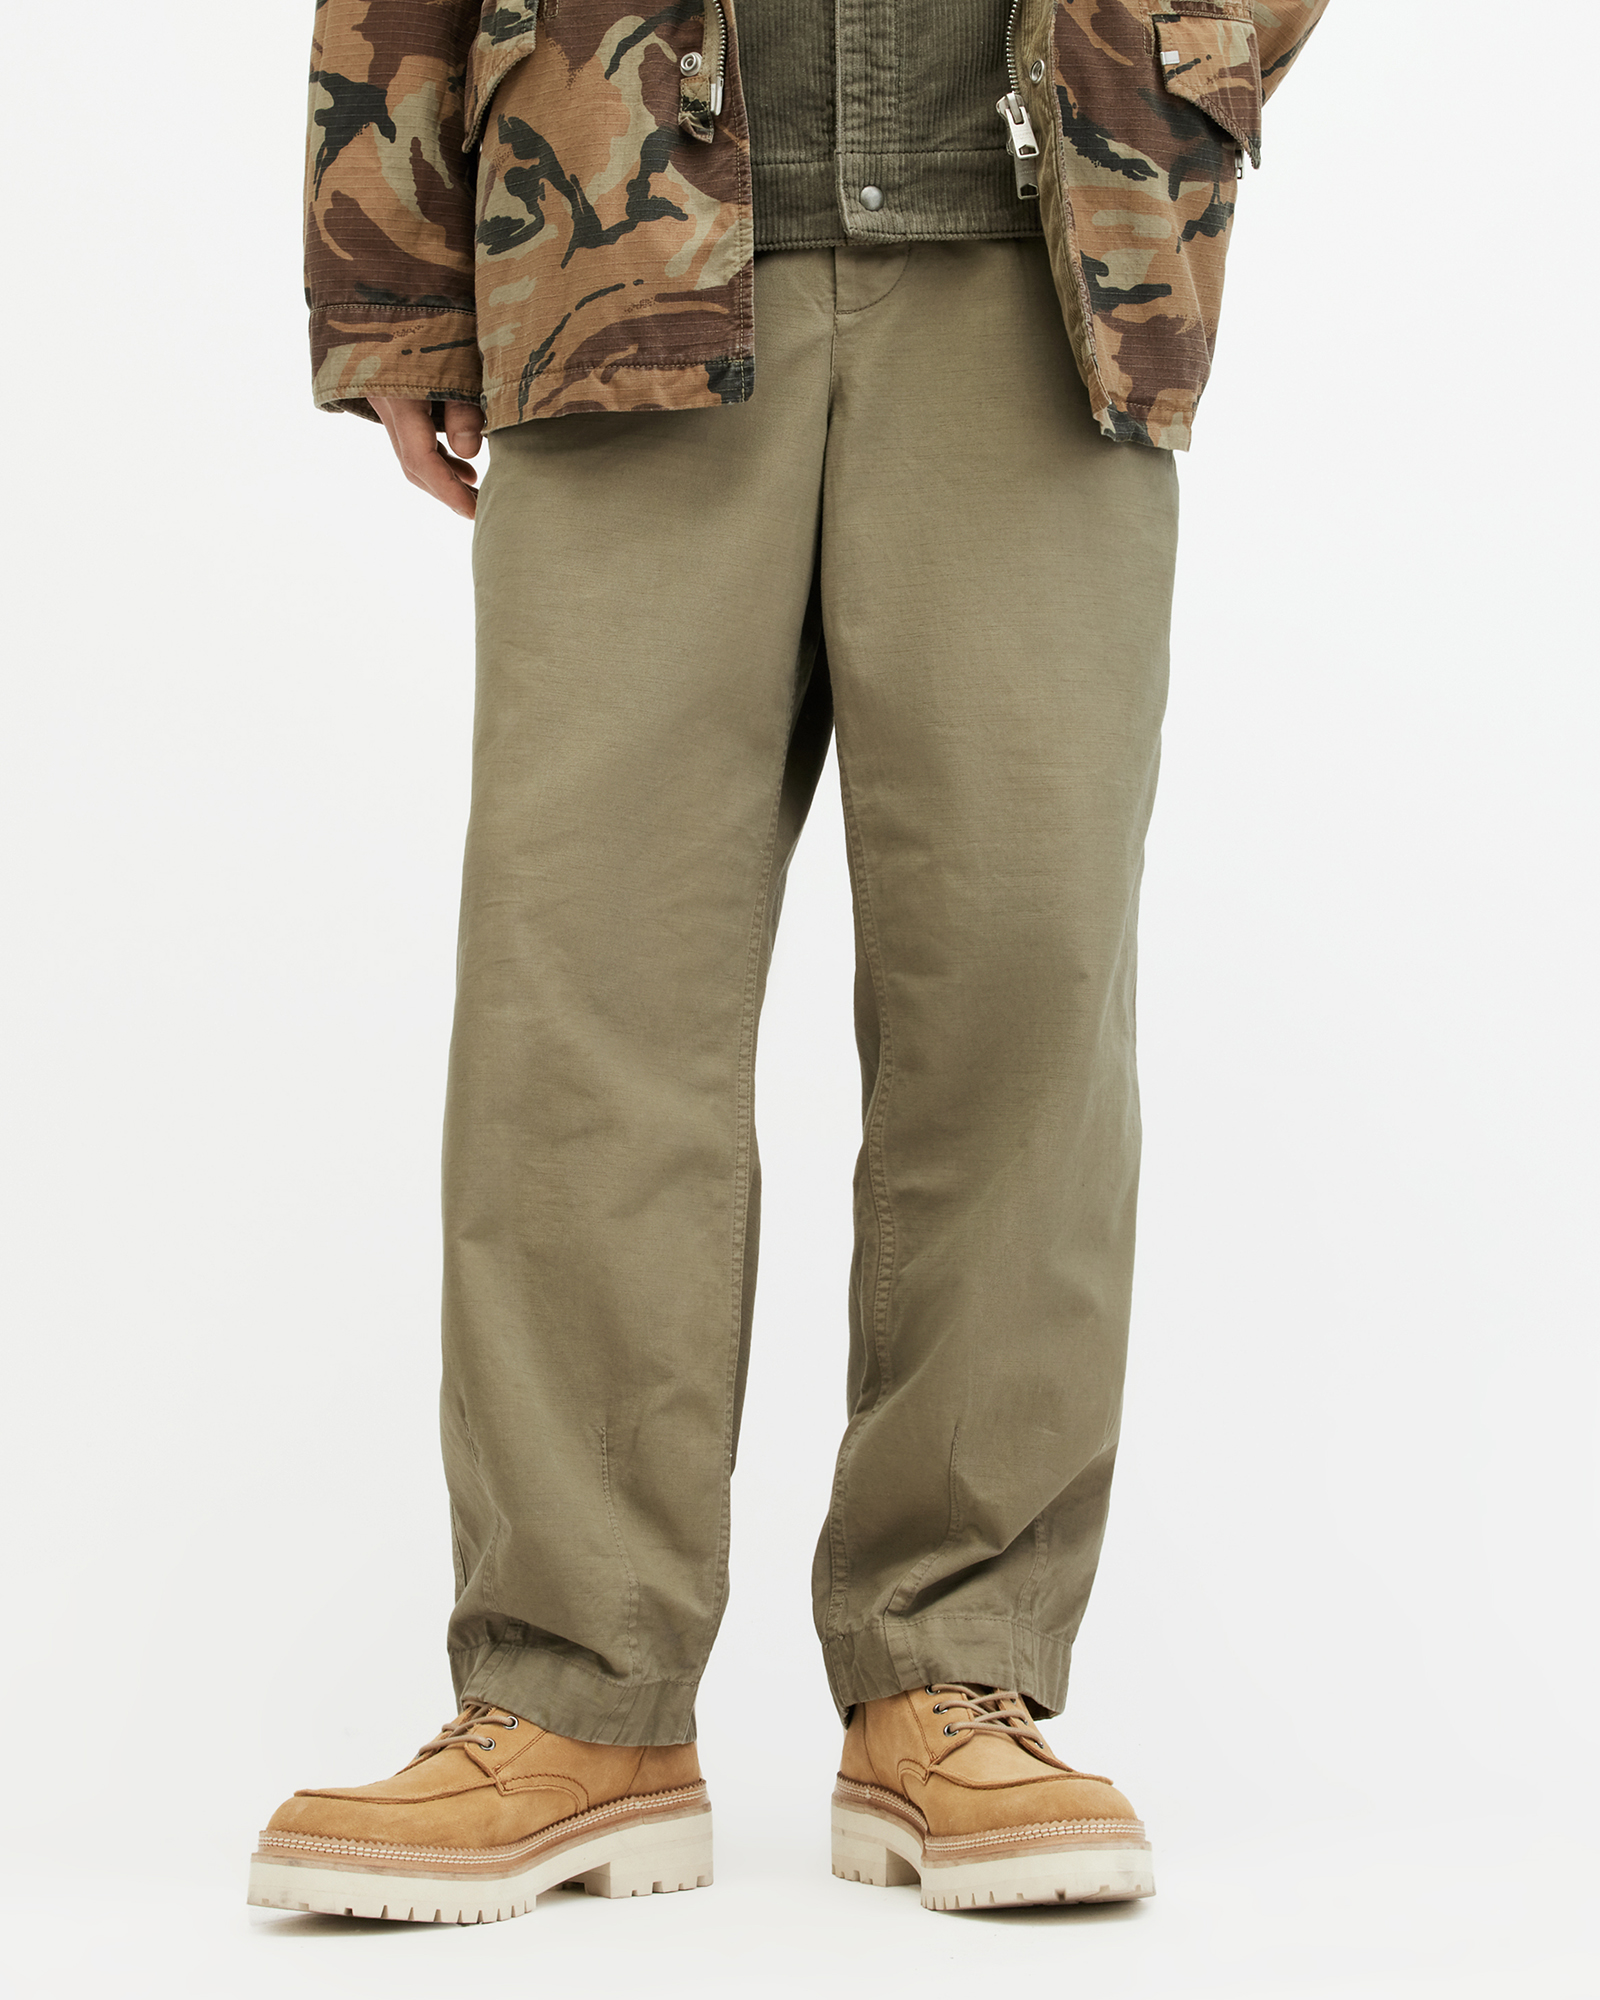 AllSaints Buck Wide Tapered Fit Trousers,, Military Green